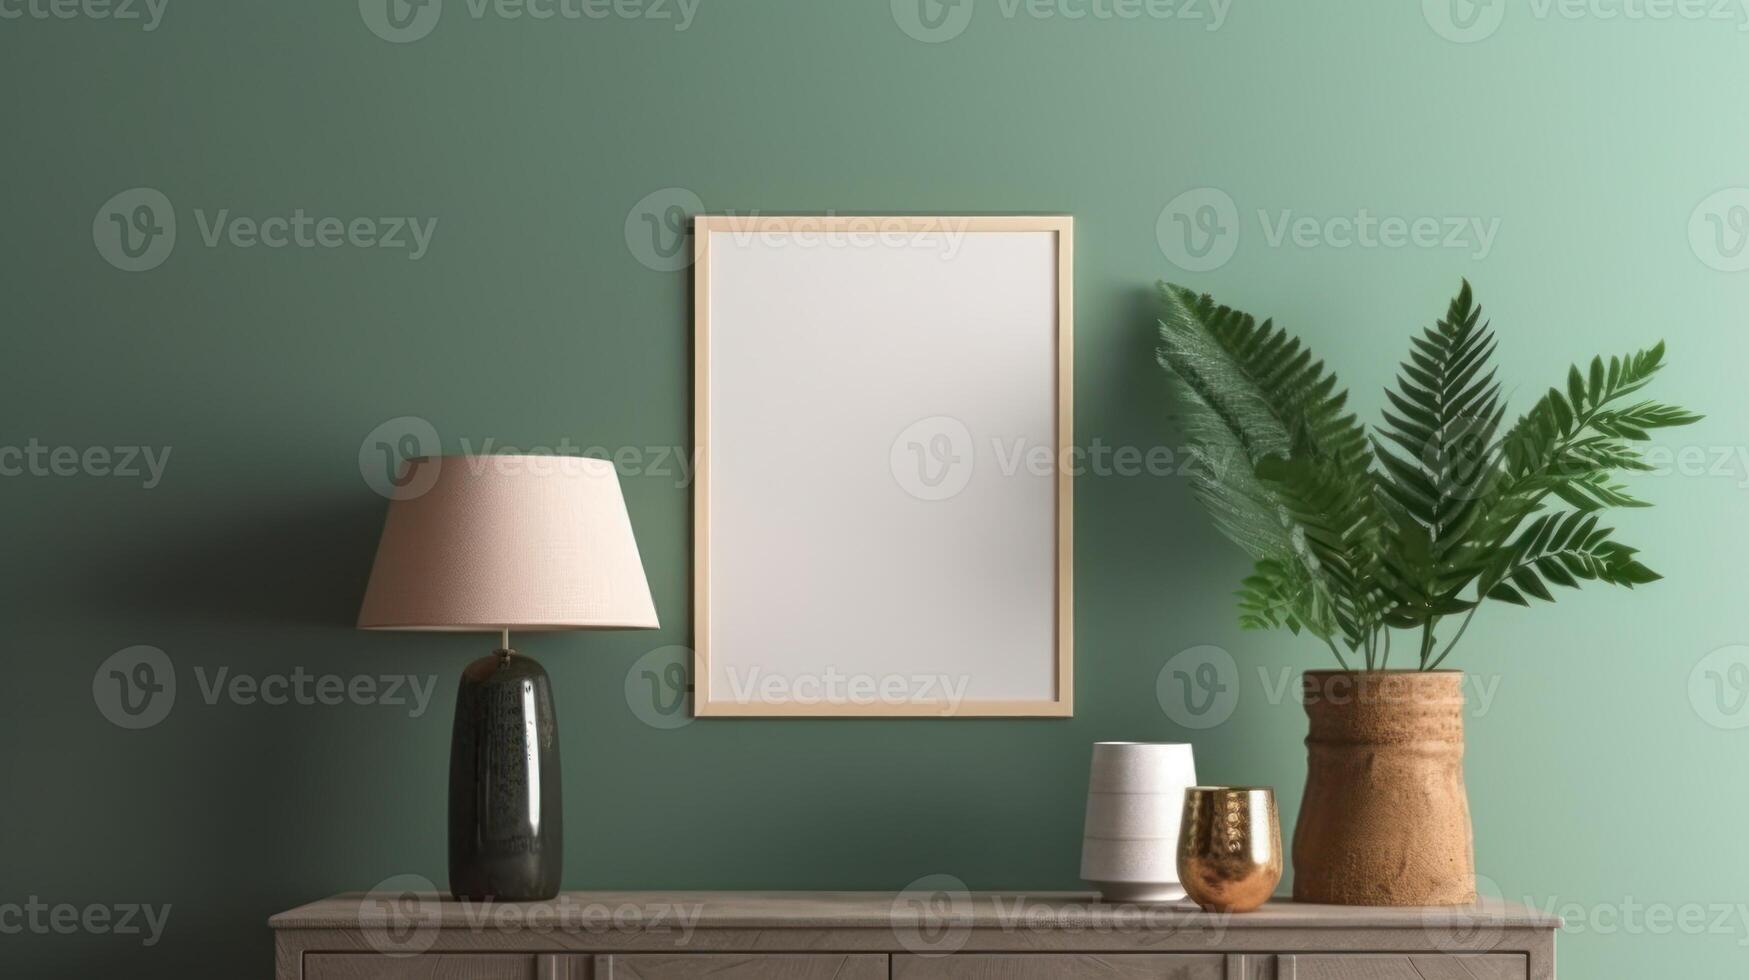 Wooden photo frame mockup green wall mounted on the wooden cabinet, interior decorated with plant leaf, lamp and vase.